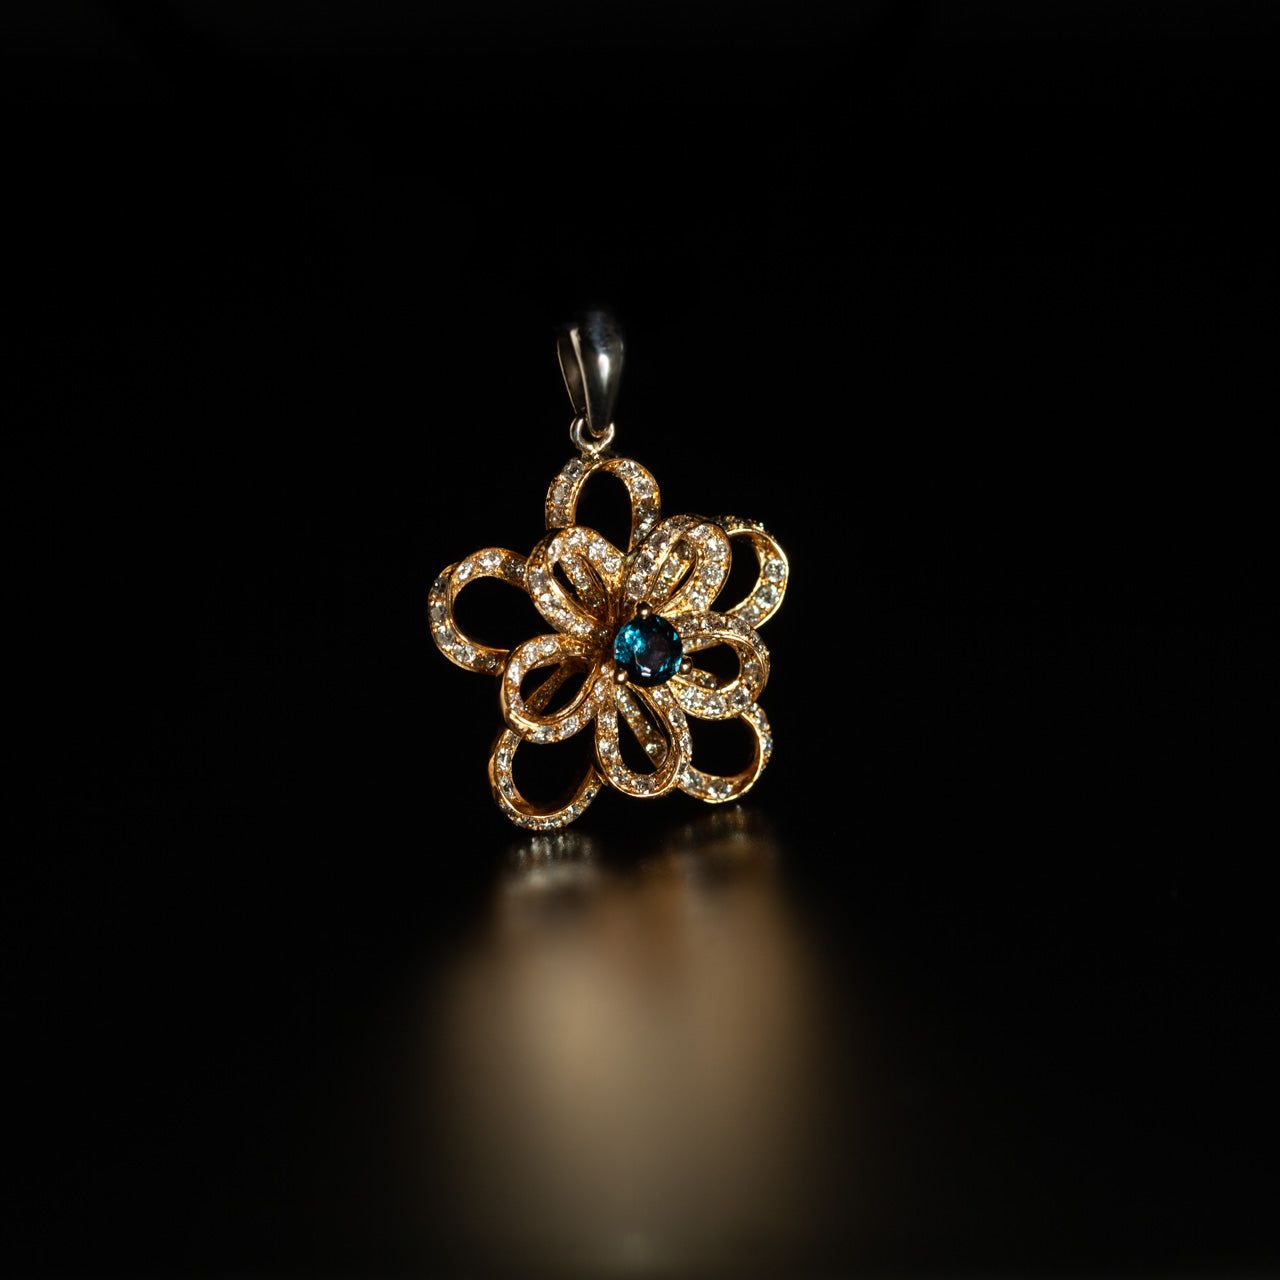 Close-up of the 0.18ct natural alexandrite set in an 18k multitone gold flower-designed pendant